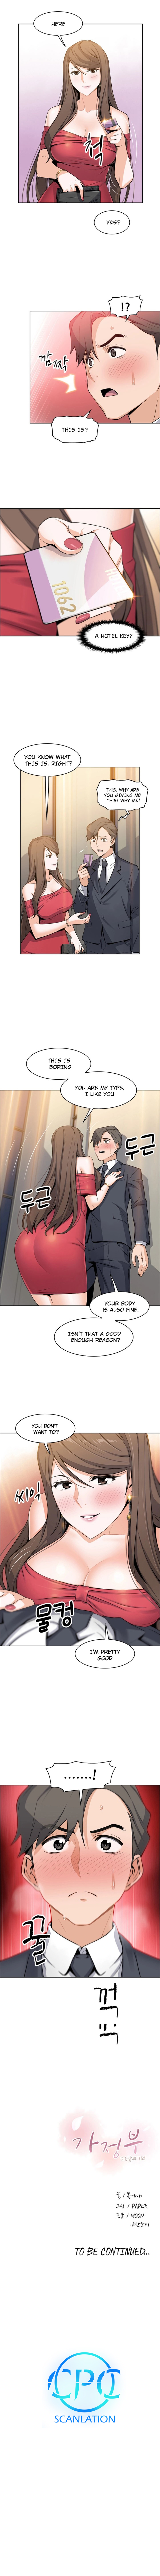 Housekeeper Manhwa - Chapter 6 Page 10